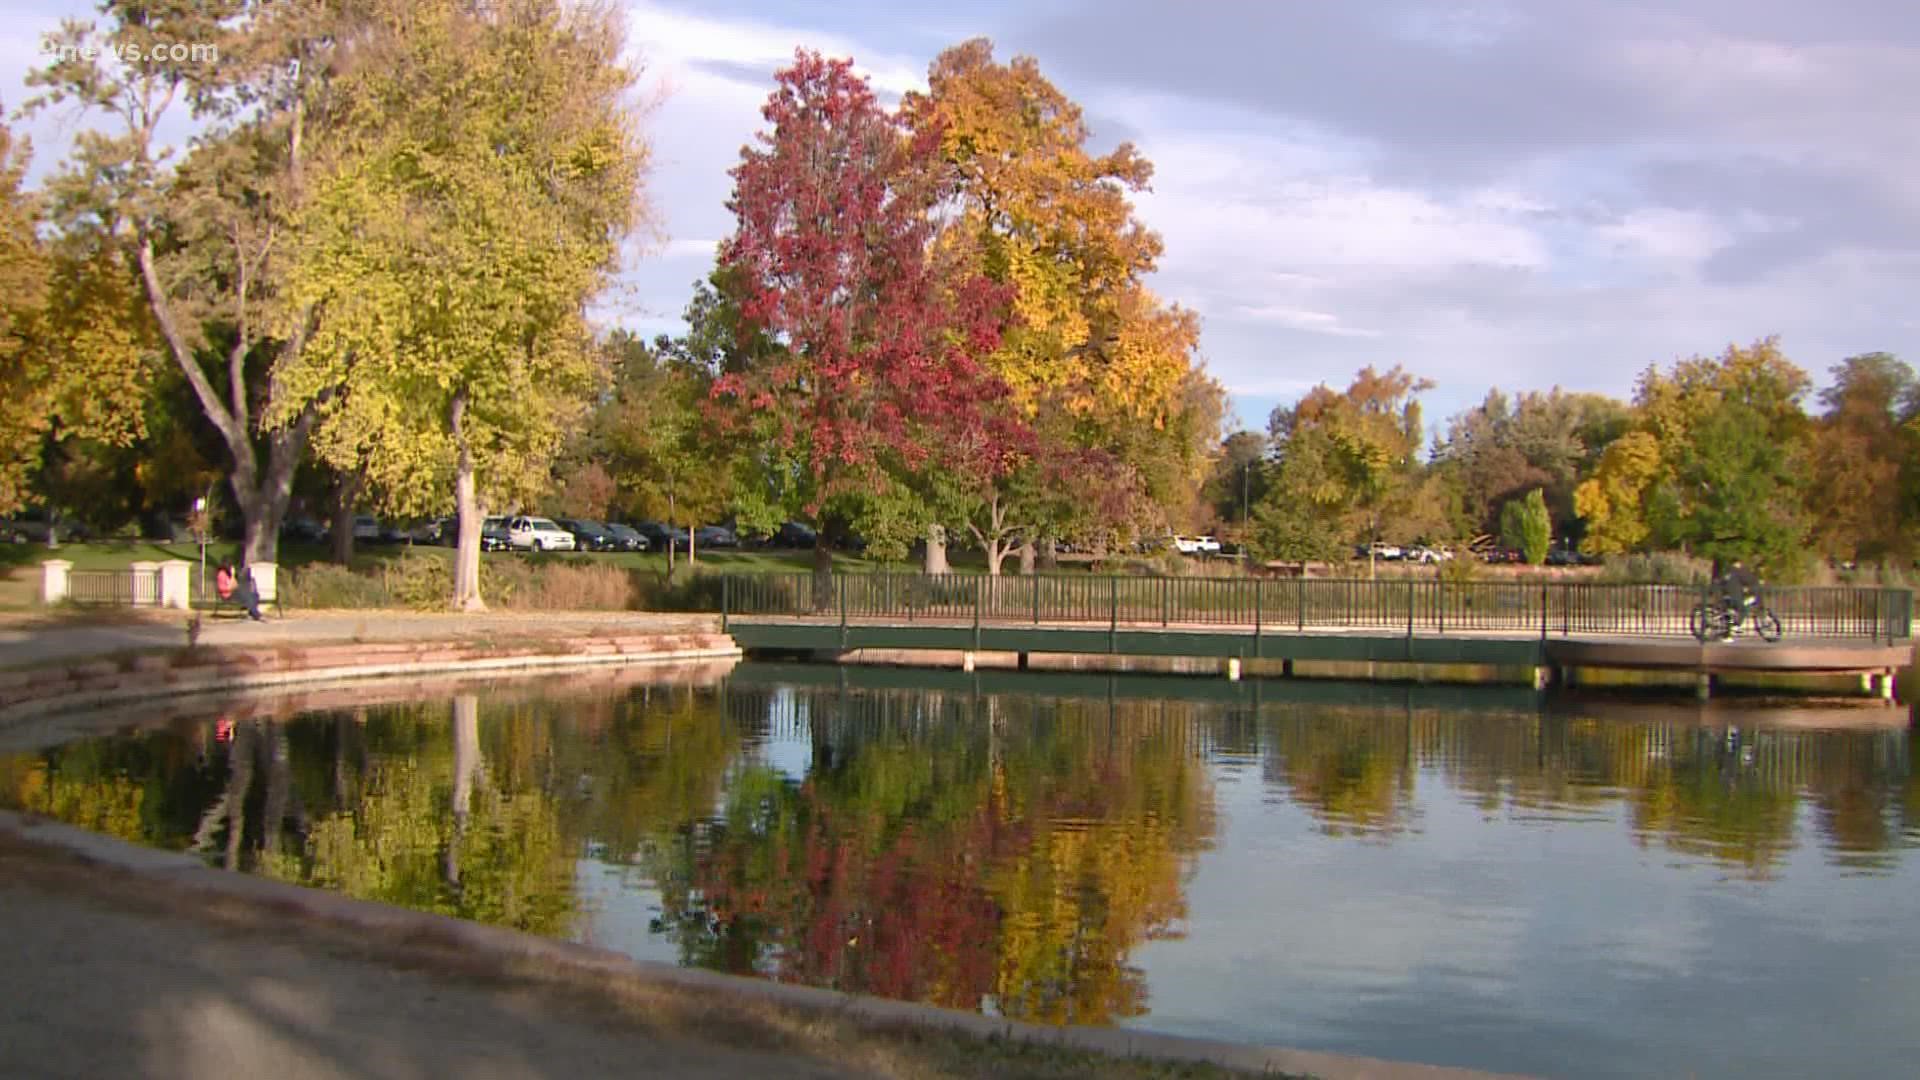 Fall colors have long peaked in the mountains. 
But now the metro area is getting some love.